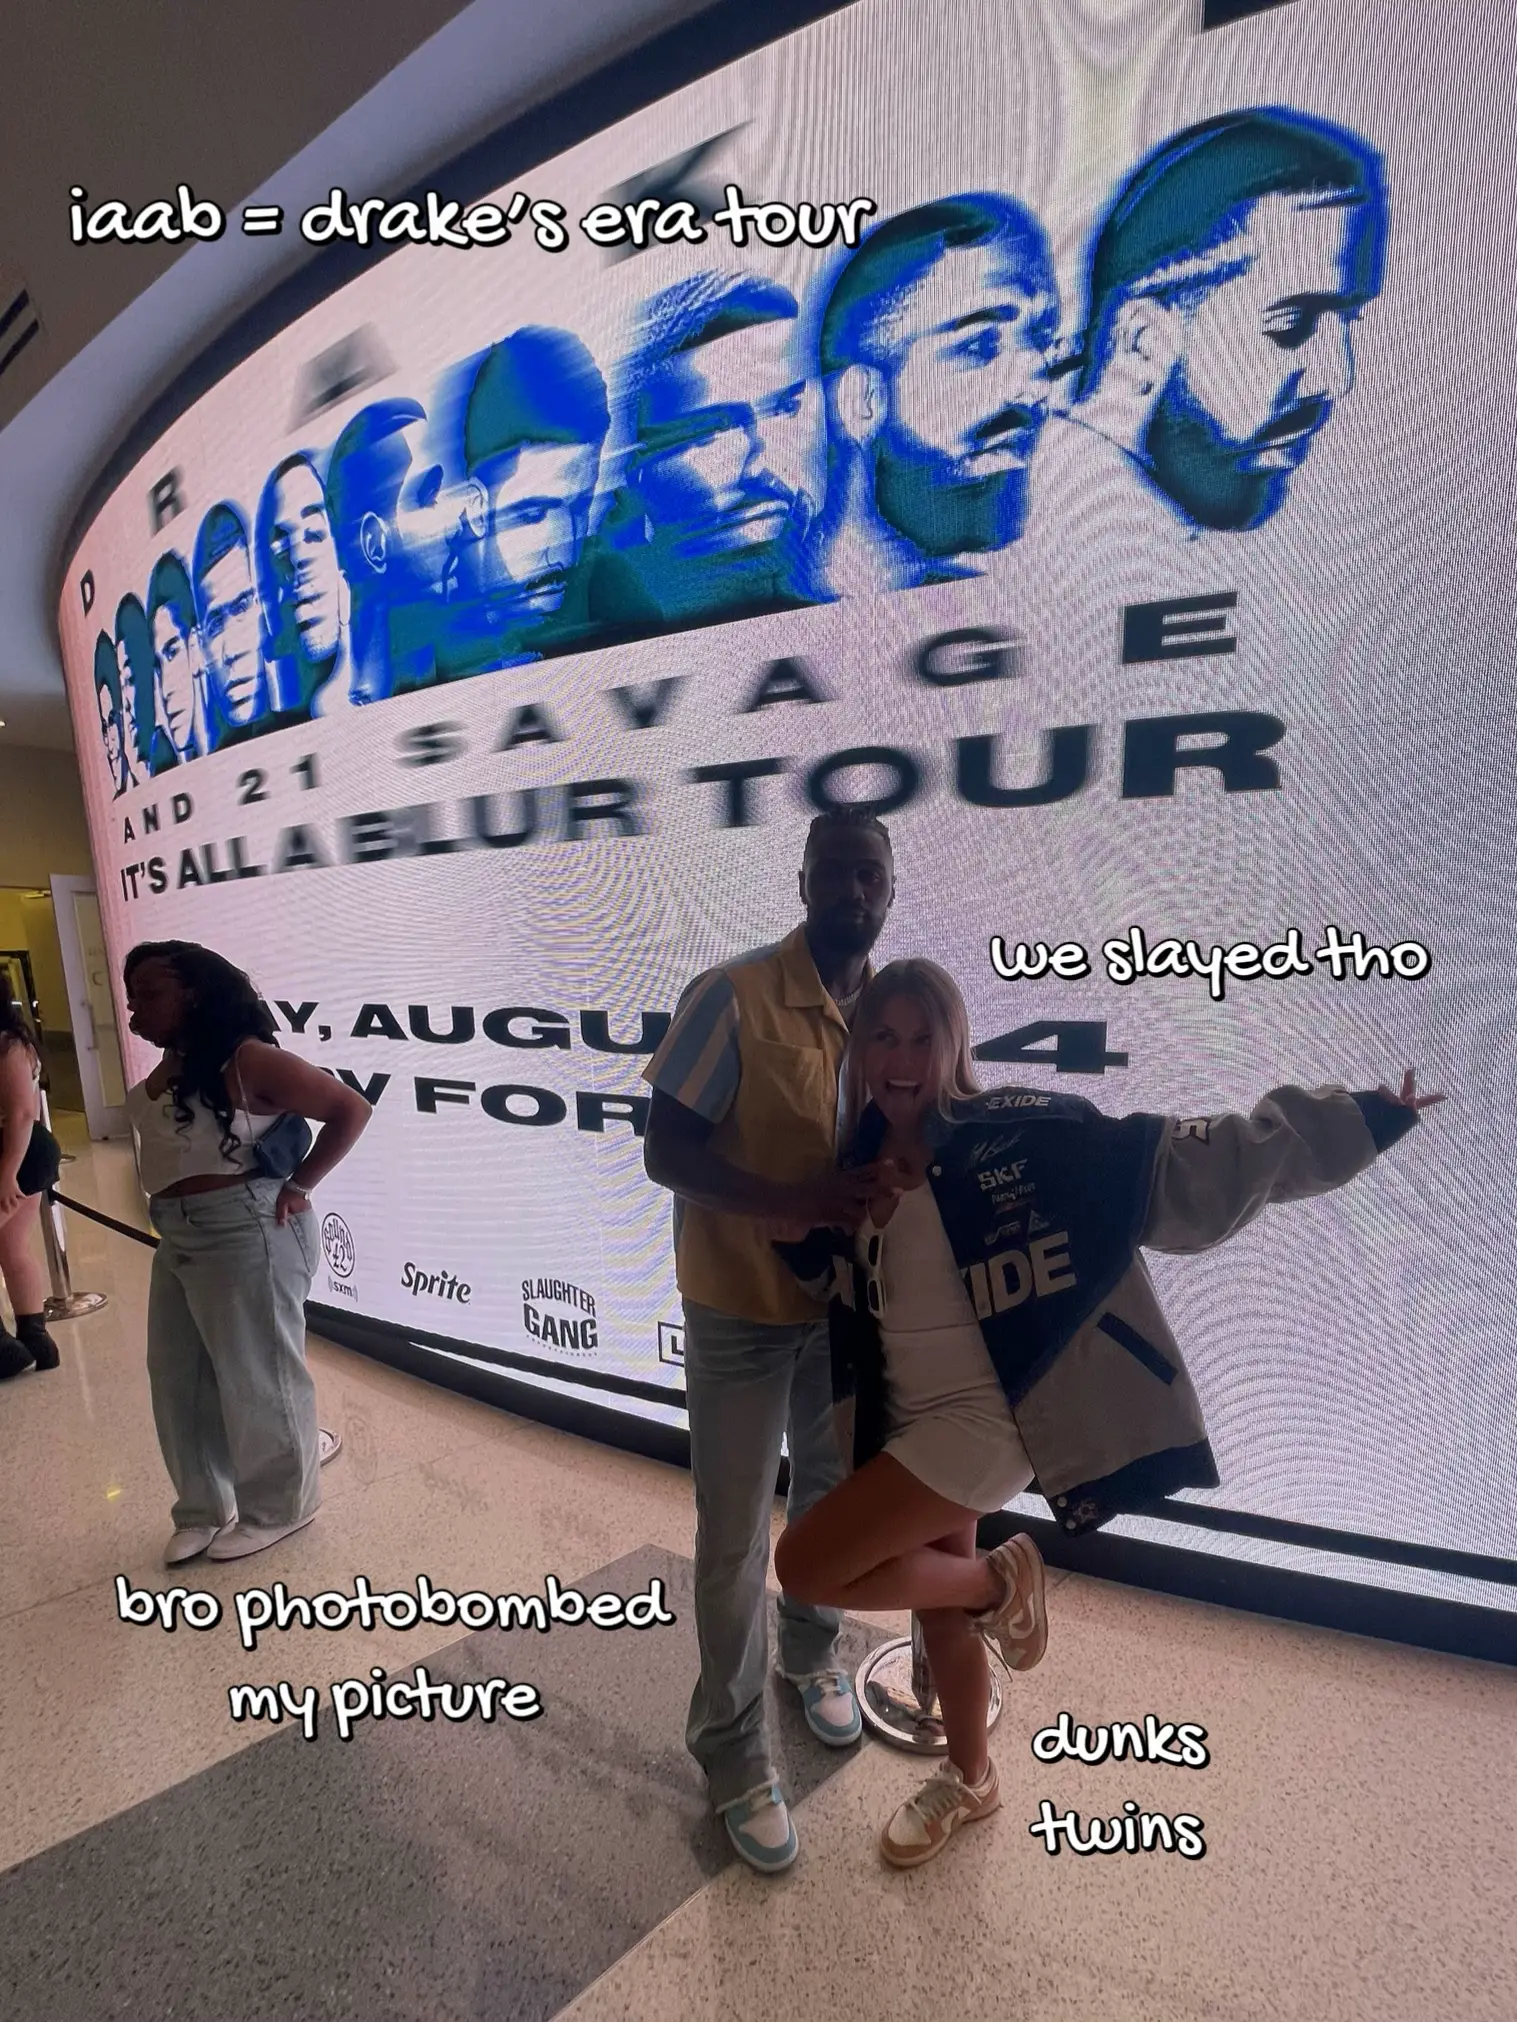  A man and a woman are standing in front of a large display of photos. The man is wearing a blue shirt and the woman is wearing a white shirt. The man is holding a cell phone and the woman is holding a cell phone. The display of photos includes people